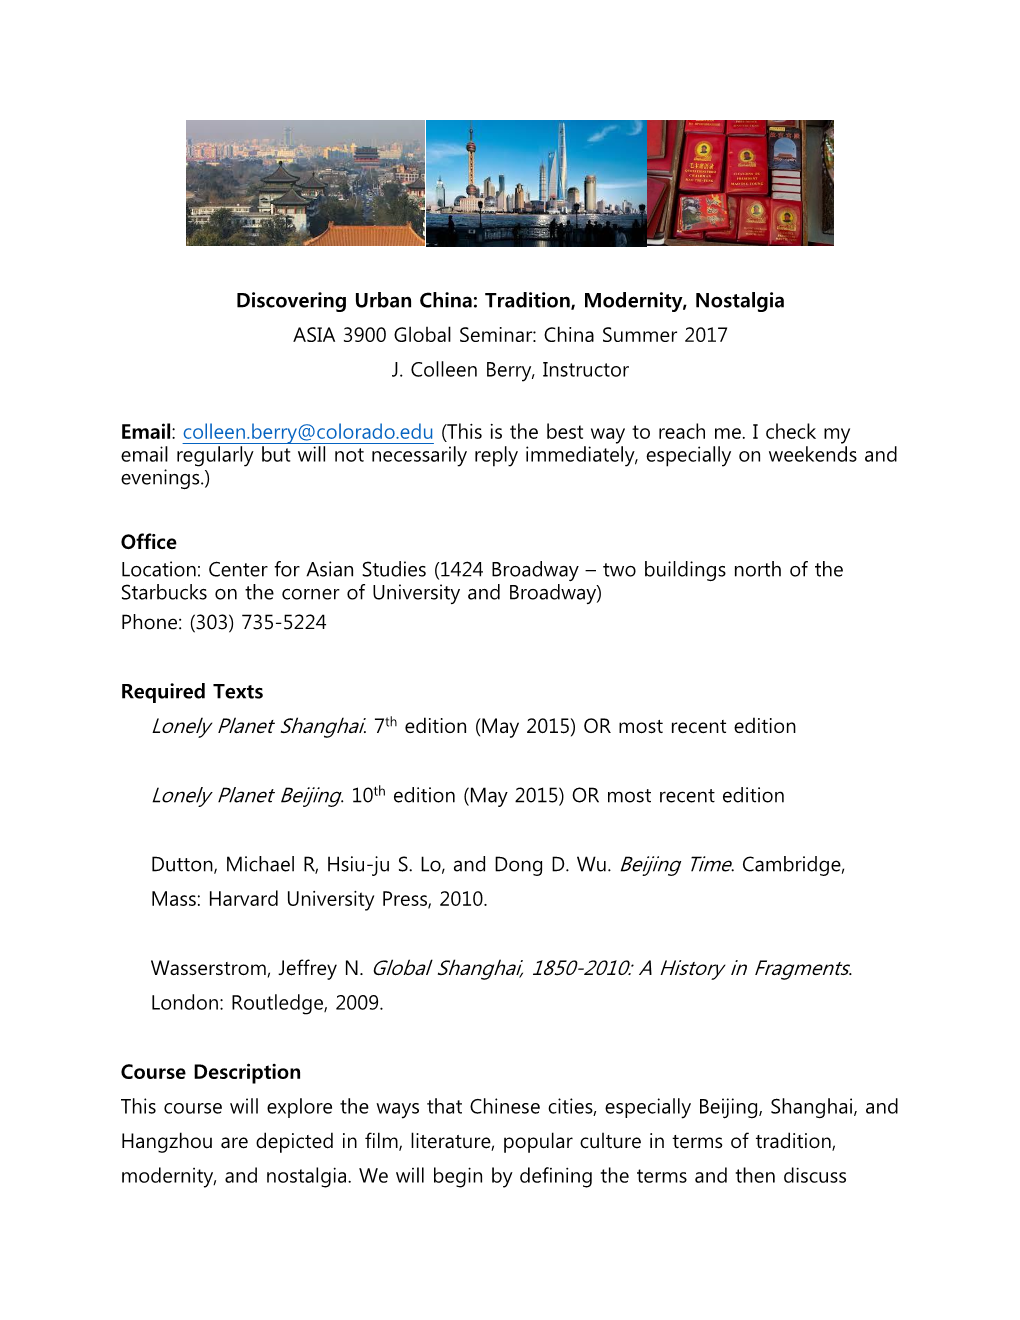 Discovering Urban China: Tradition, Modernity, Nostalgia ASIA 3900 Global Seminar: China Summer 2017 J. Colleen Berry, Instructor